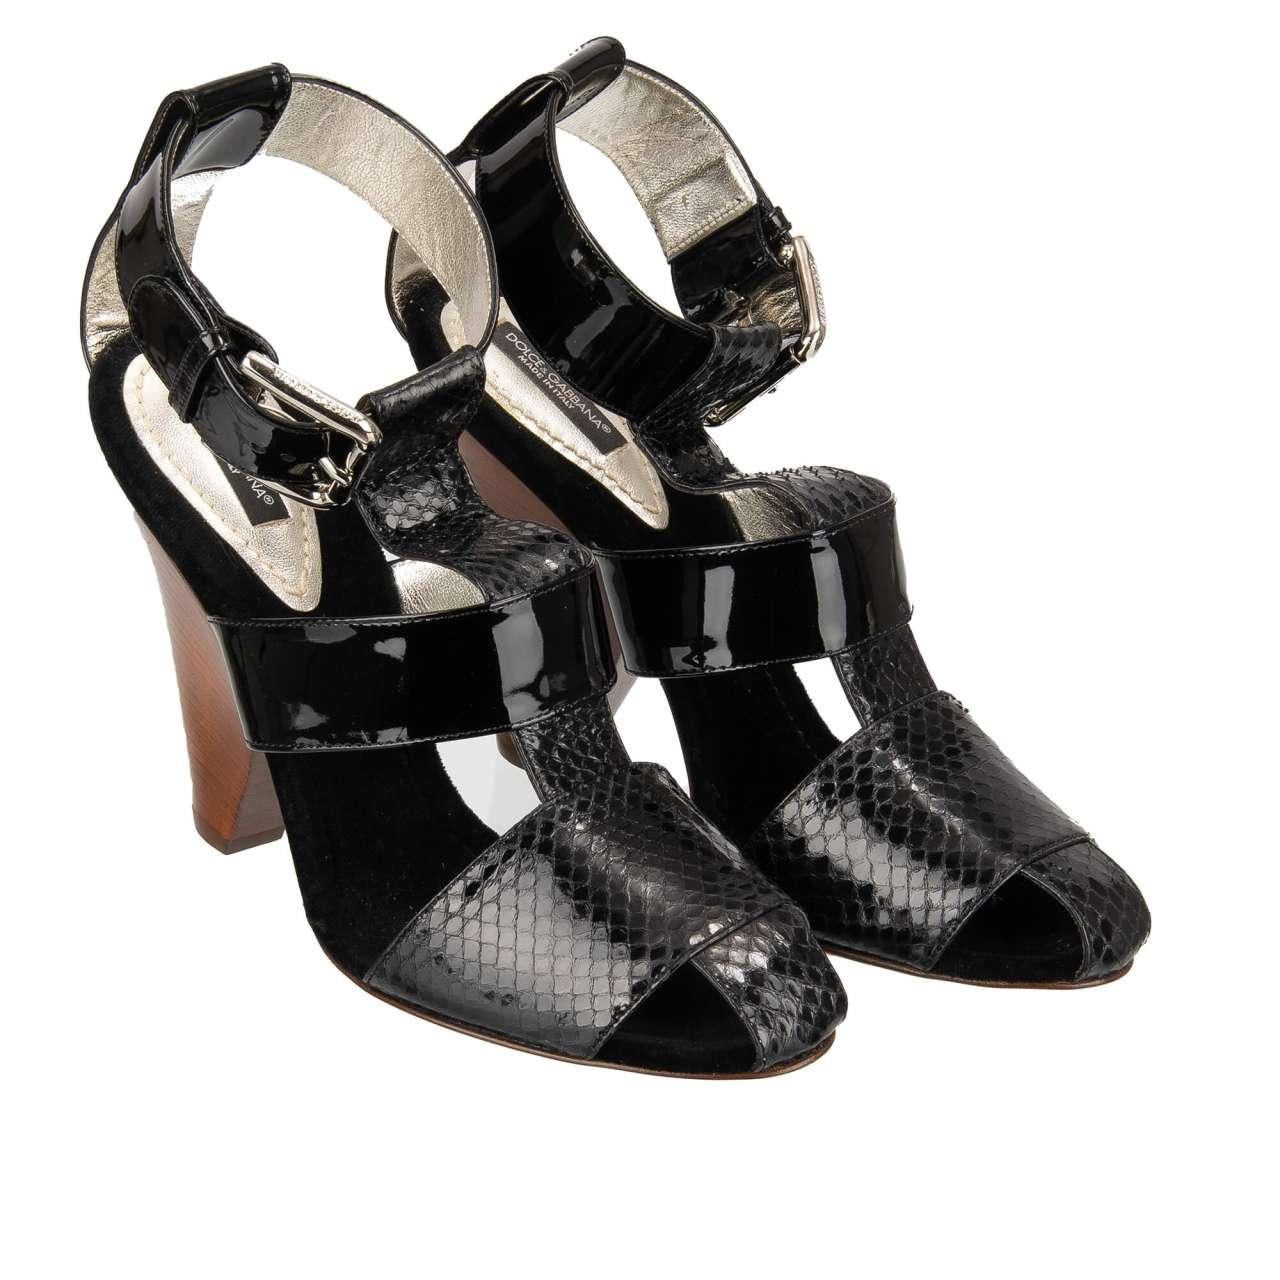 - Snake and patent leather Heels Sandals with straps in black by DOLCE & GABBANA - New with Box - MADE IN ITALY - Former RRP: EUR 595 - Model: C07630-A8765-8B956 - Material: 61% Ayers, 39% Calfskin - Inner Material: leather - Sole: Leather - Color: